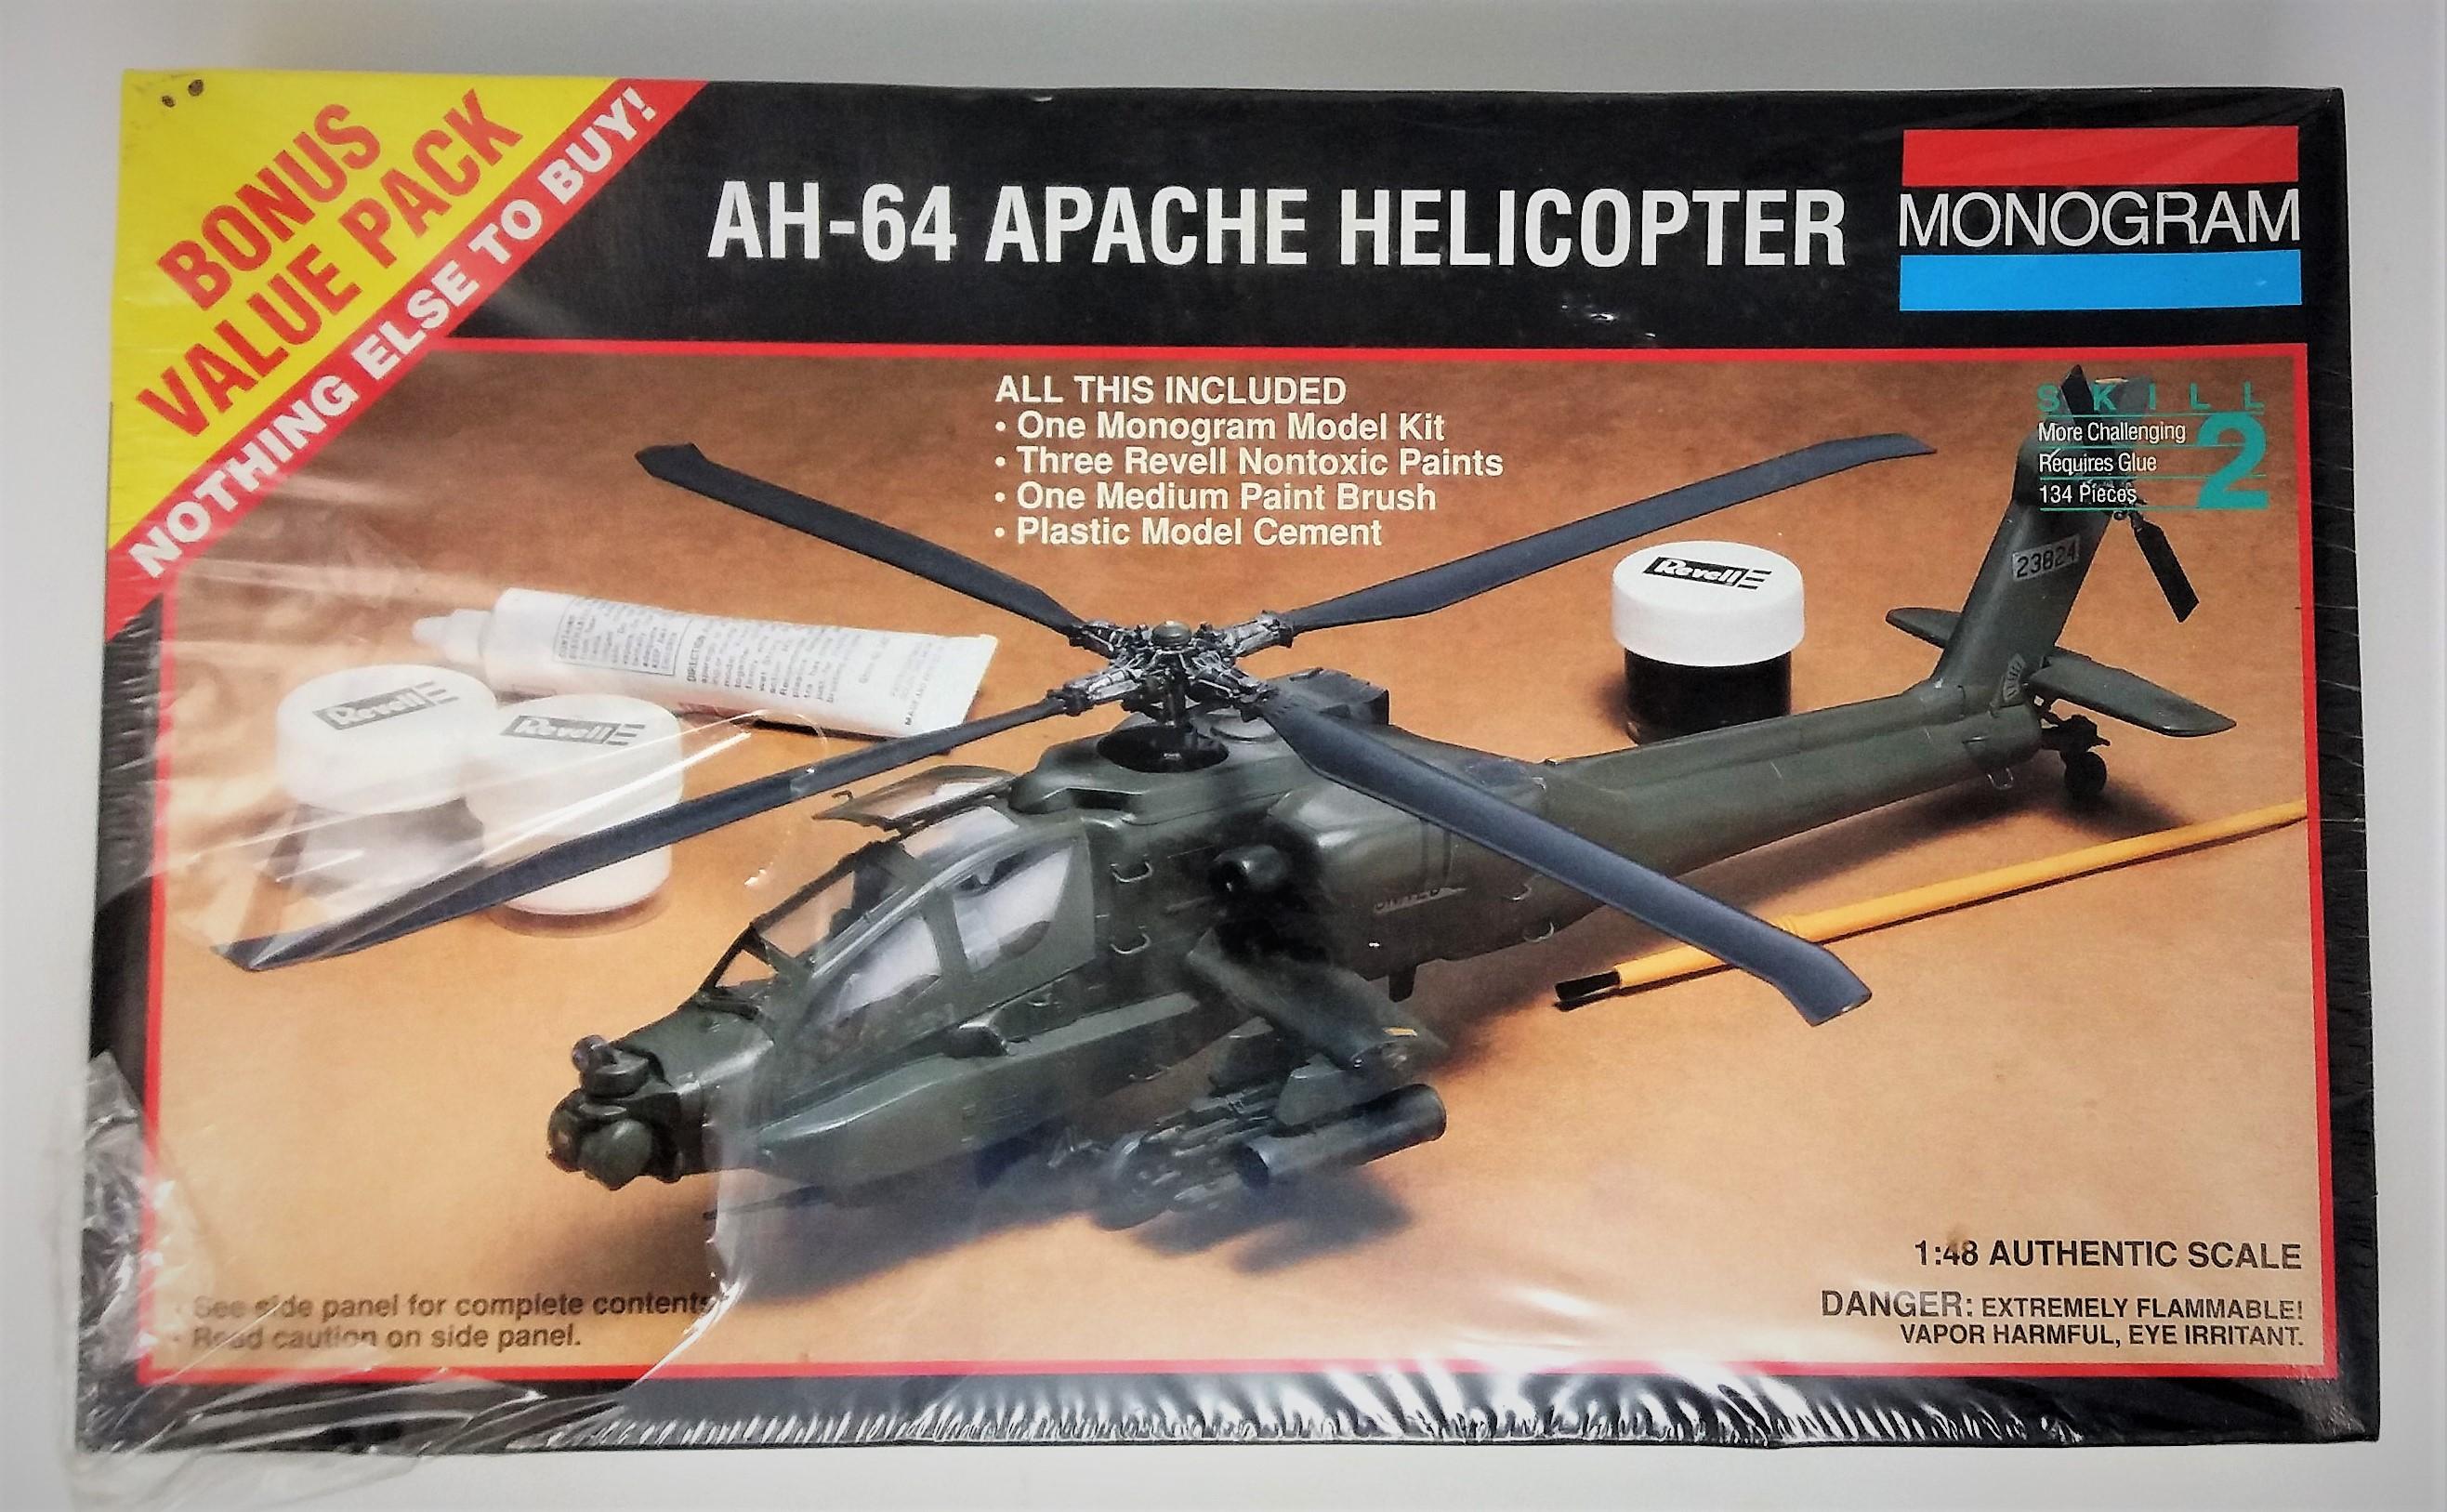 1/48 Scale AH 64 Apache Attack Helicopter Monogram Plastic Model Kit